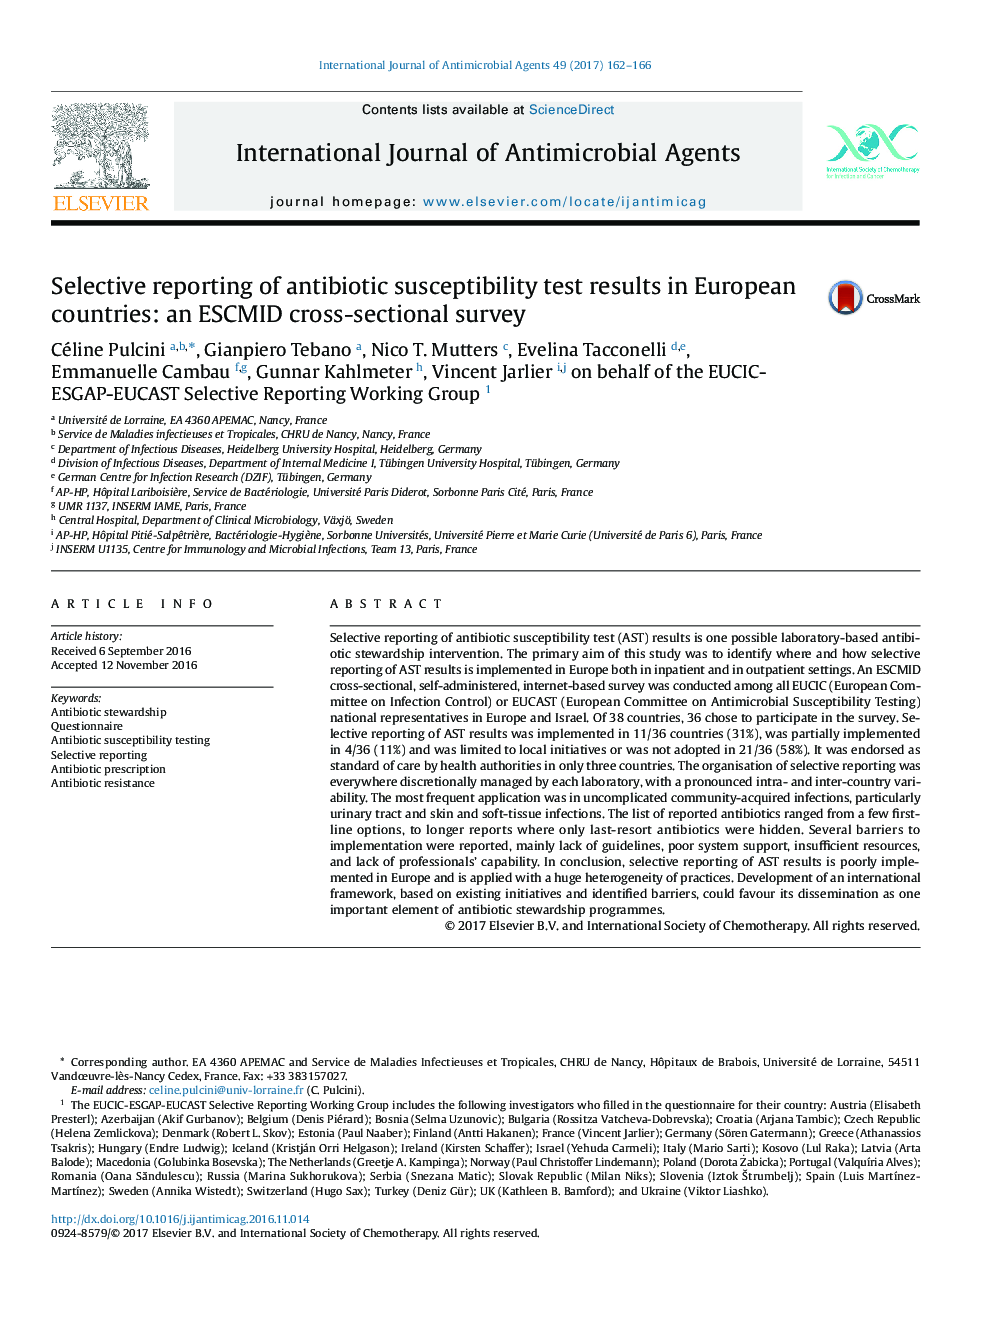 Selective reporting of antibiotic susceptibility test results in European countries: an ESCMID cross-sectional survey